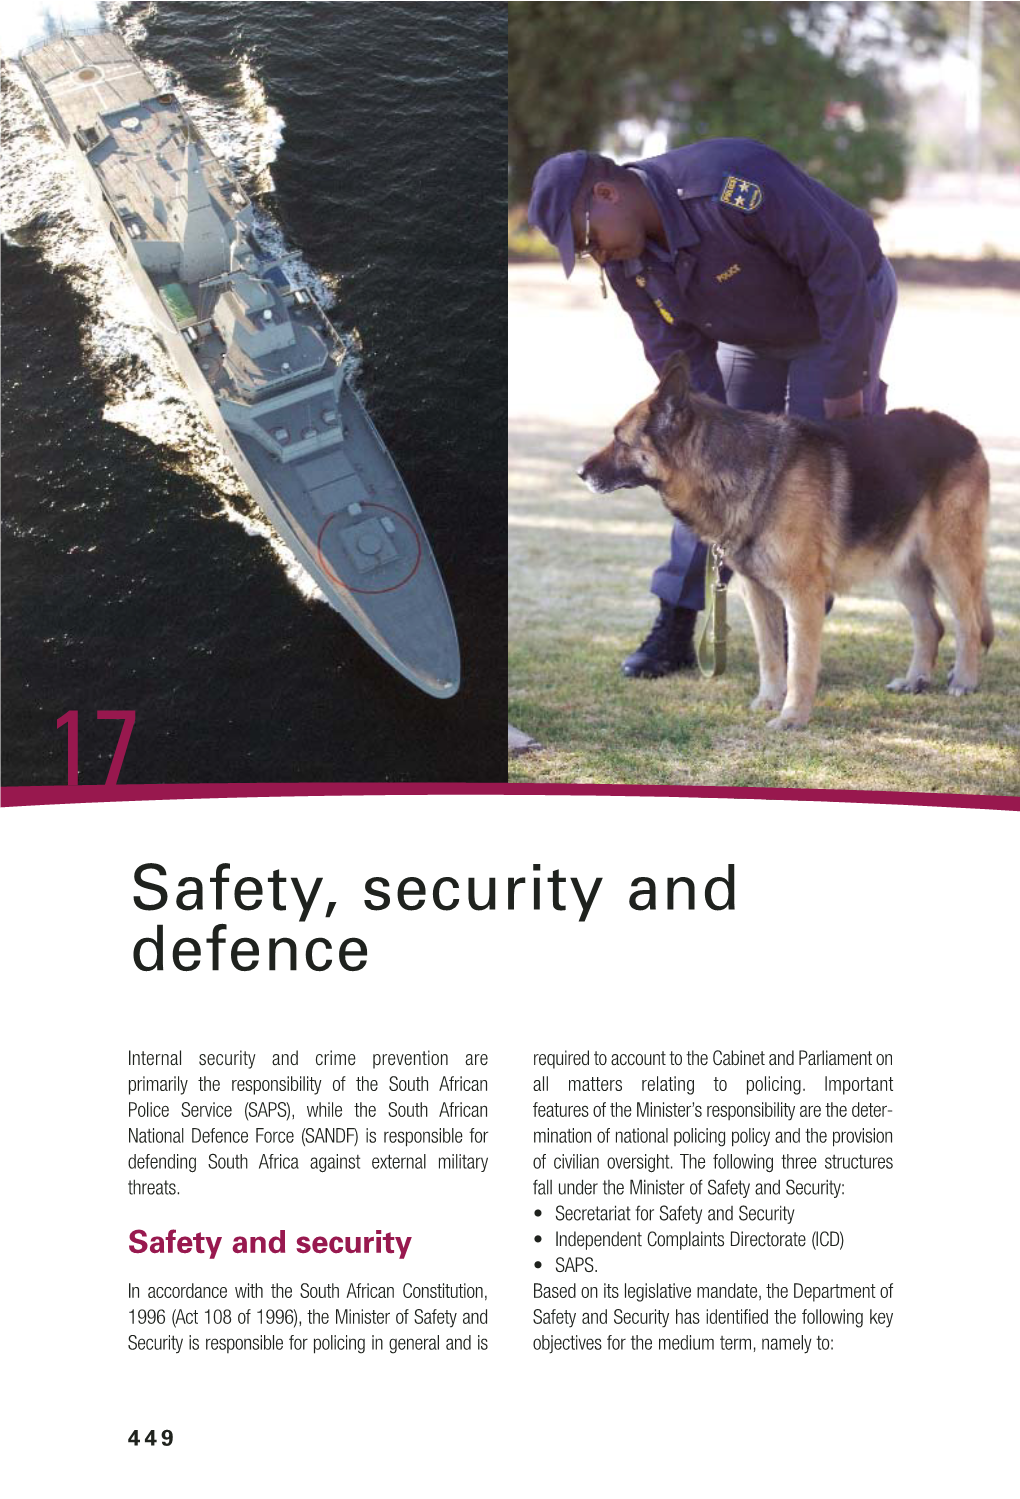 Safety, Security and Defence